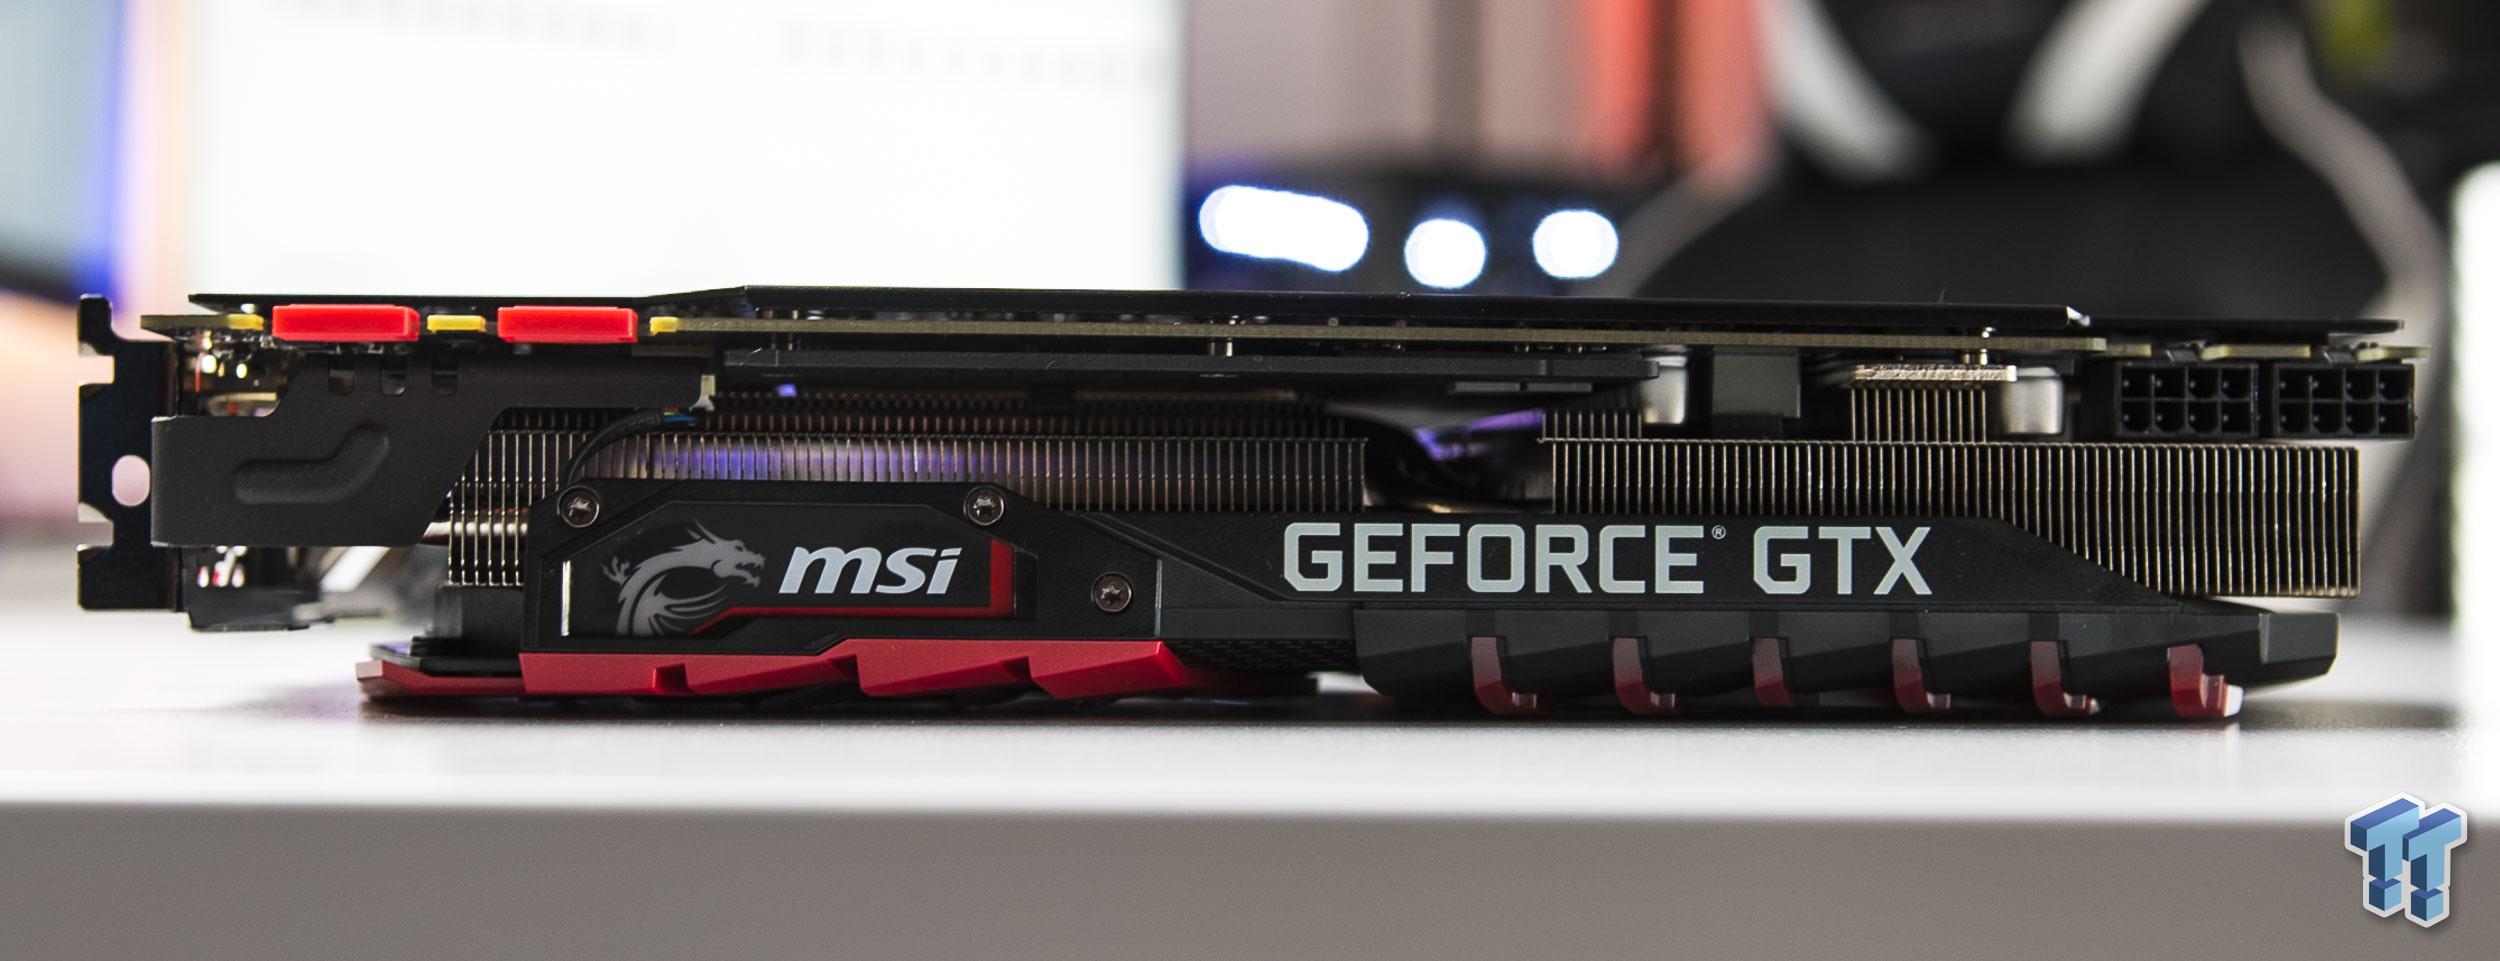 PC/タブレット PCパーツ MSI GeForce GTX 1080 Ti Gaming X 11G Review - The Best!